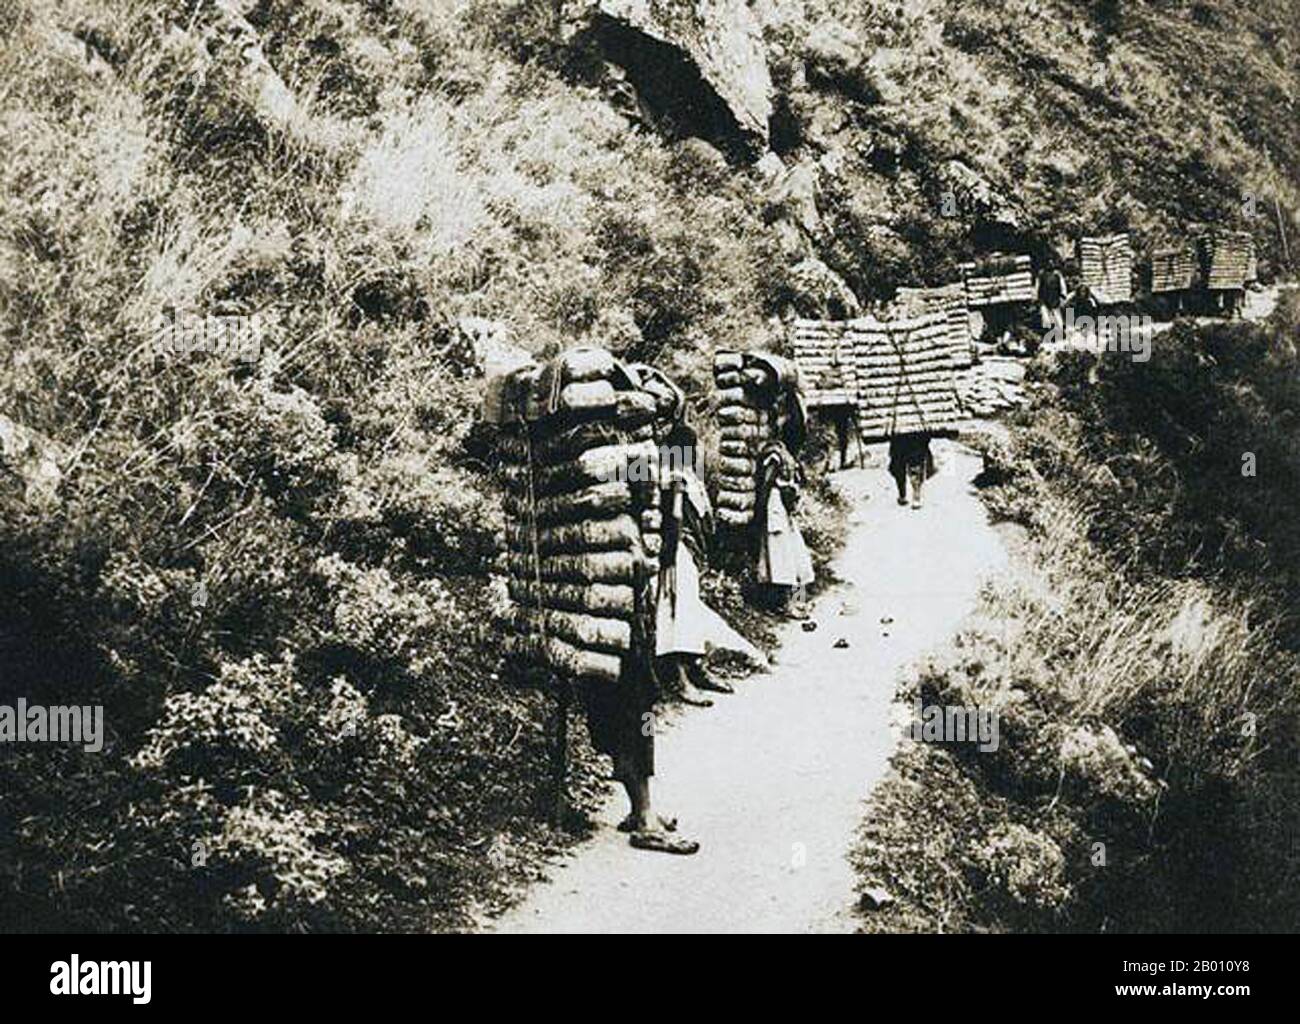 China: Tea Porters on Tea Horse Road, Western Sichuan. Photo by Auguste Francois (1857-1935), 1908. Stock Photo